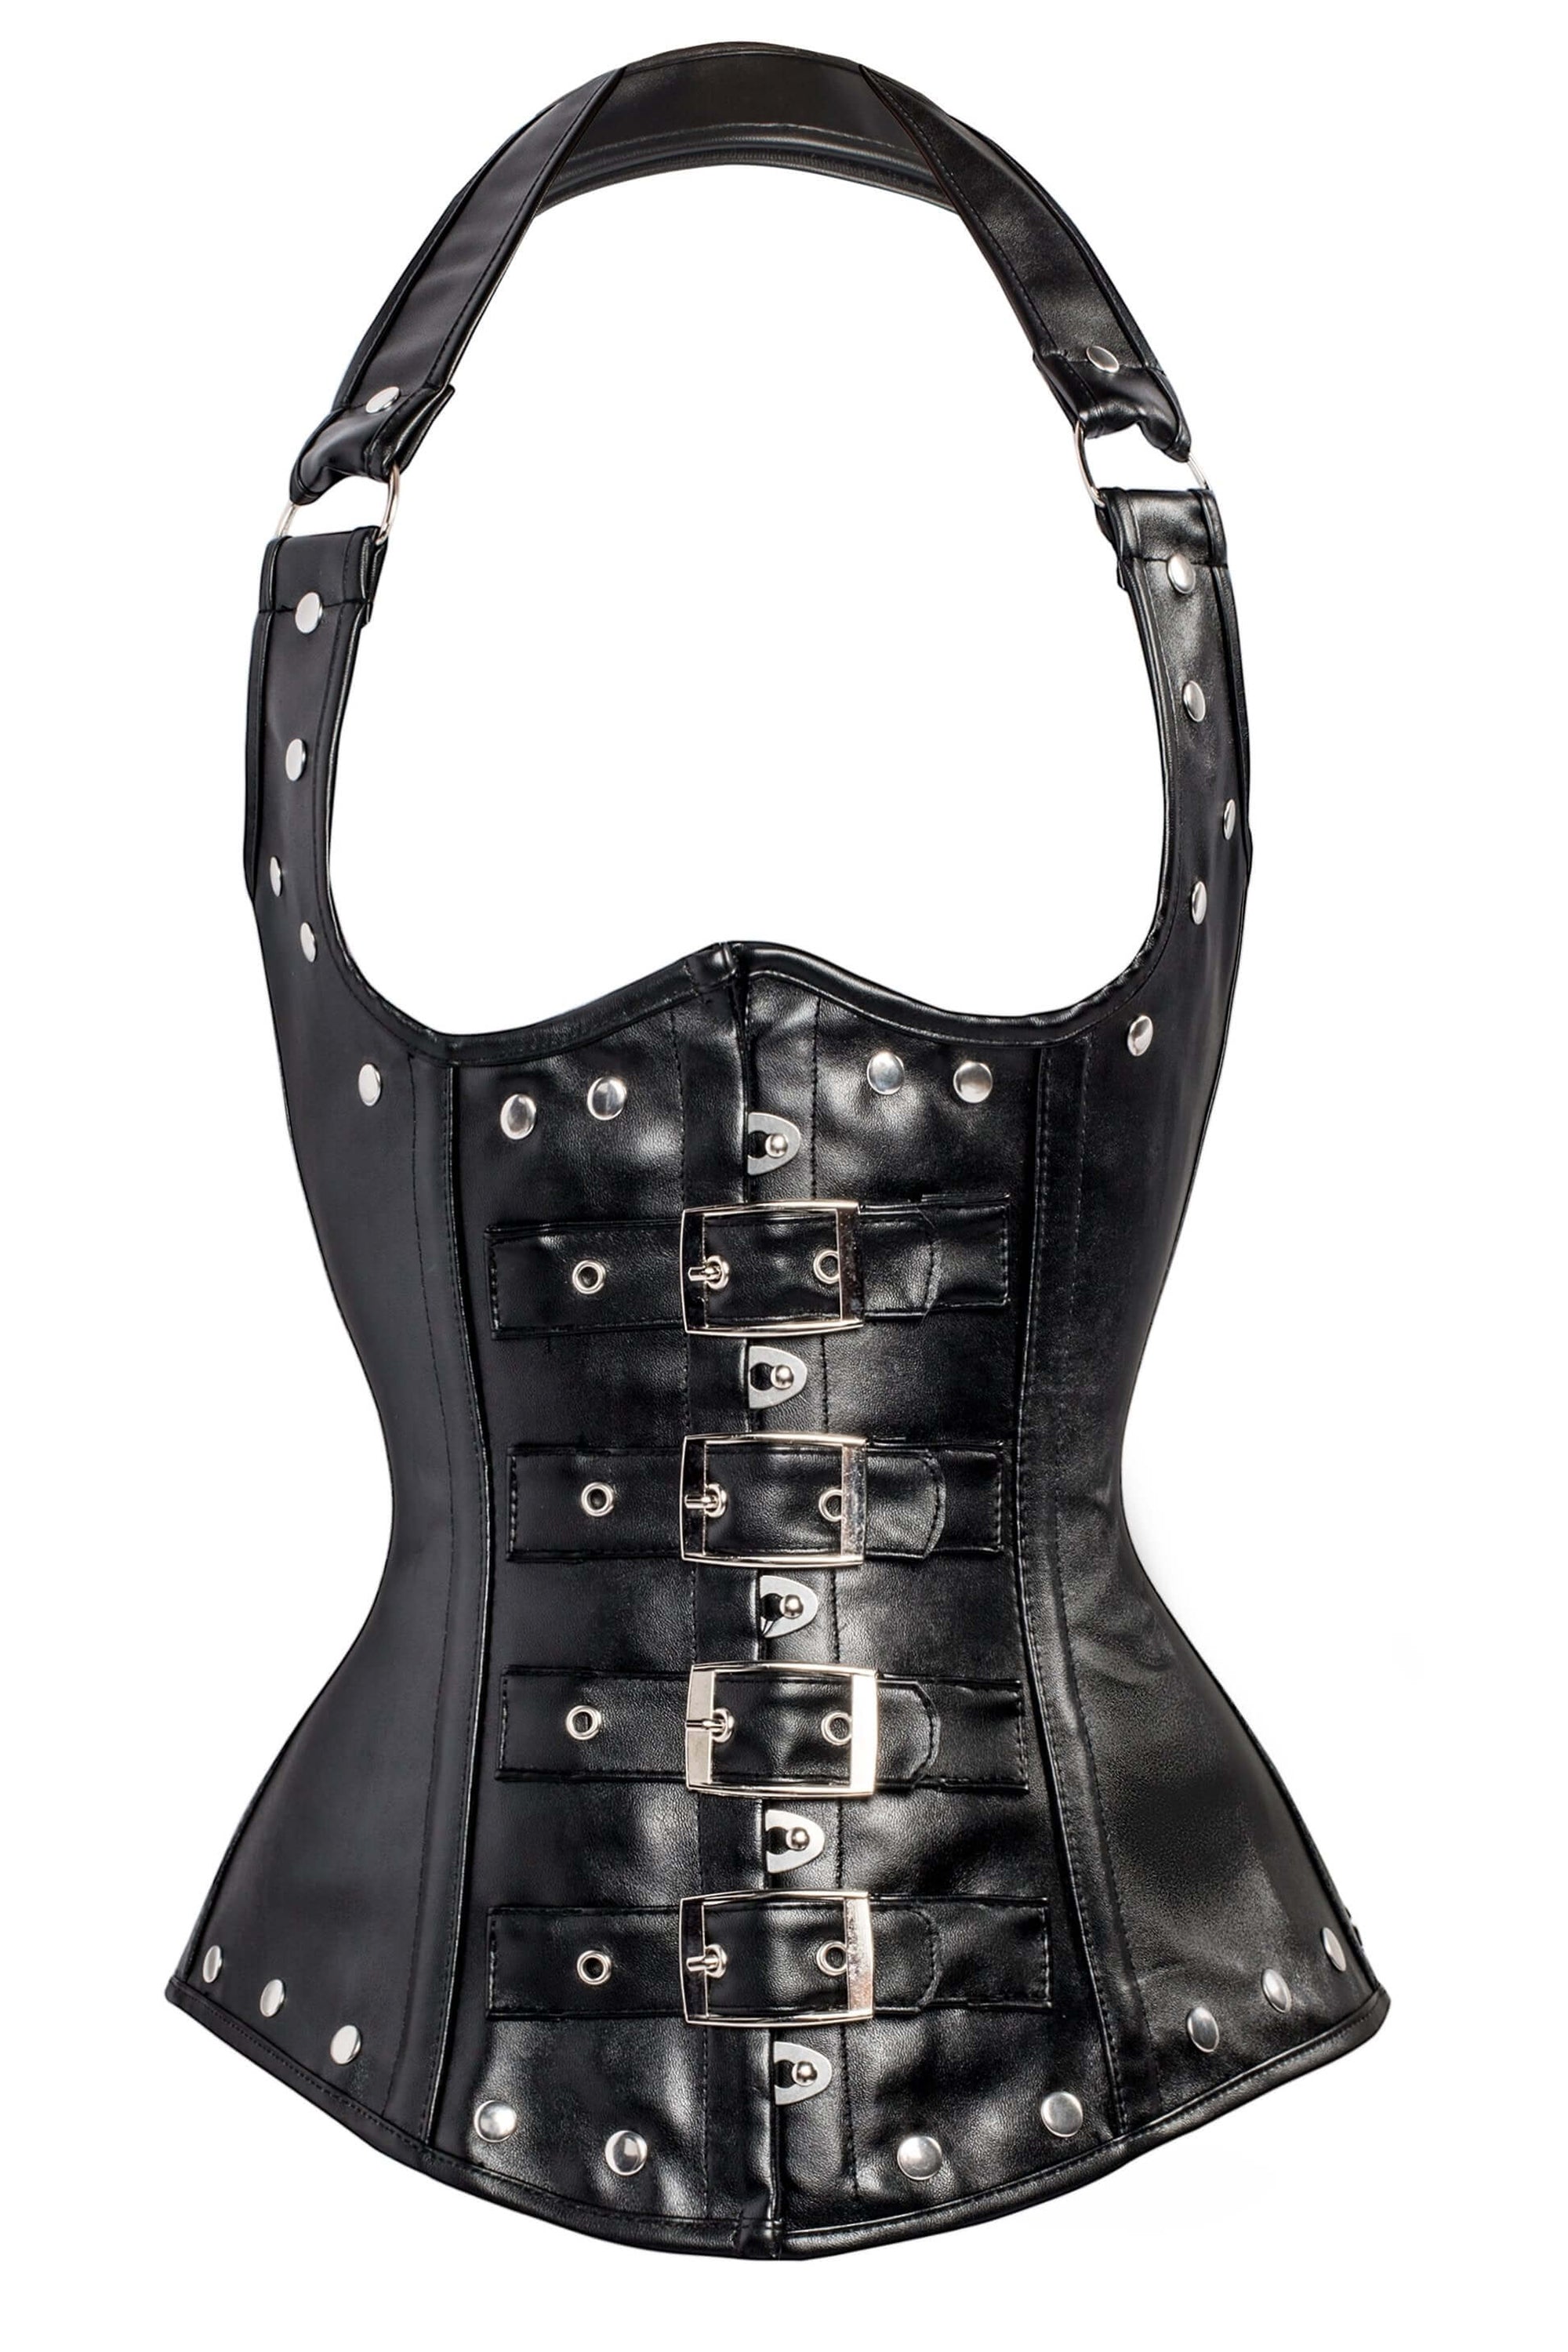 Nituyy Women Corset Lace Up Bandage Black PU Leather Bustier Underbust  Support 